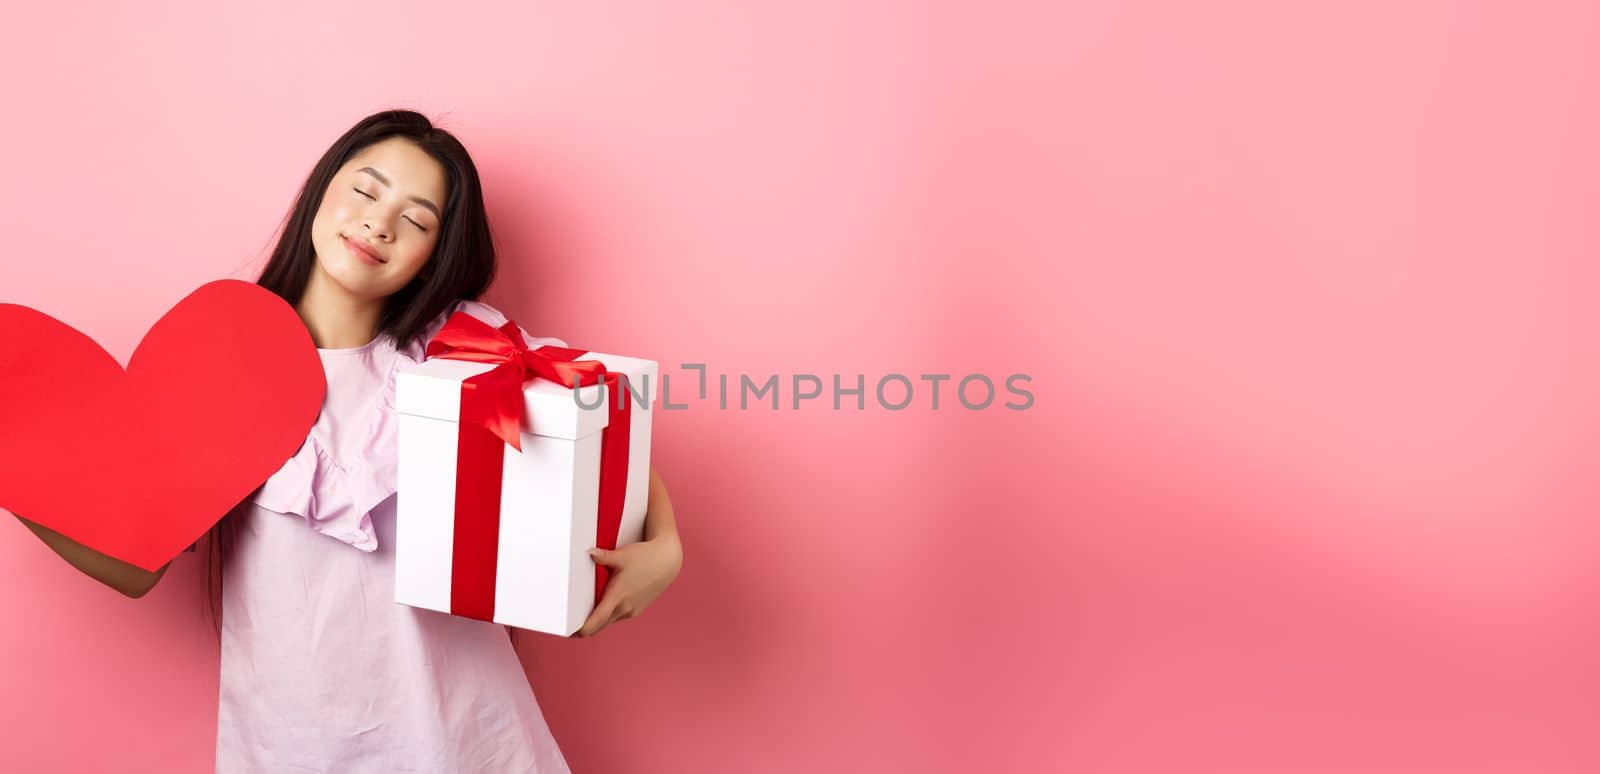 Valentines day concept. Romantic and tender asian teen girl smiling, close eyes and standing dreamy with lover gifts, holding present and big red heart cutout, pink background by Benzoix